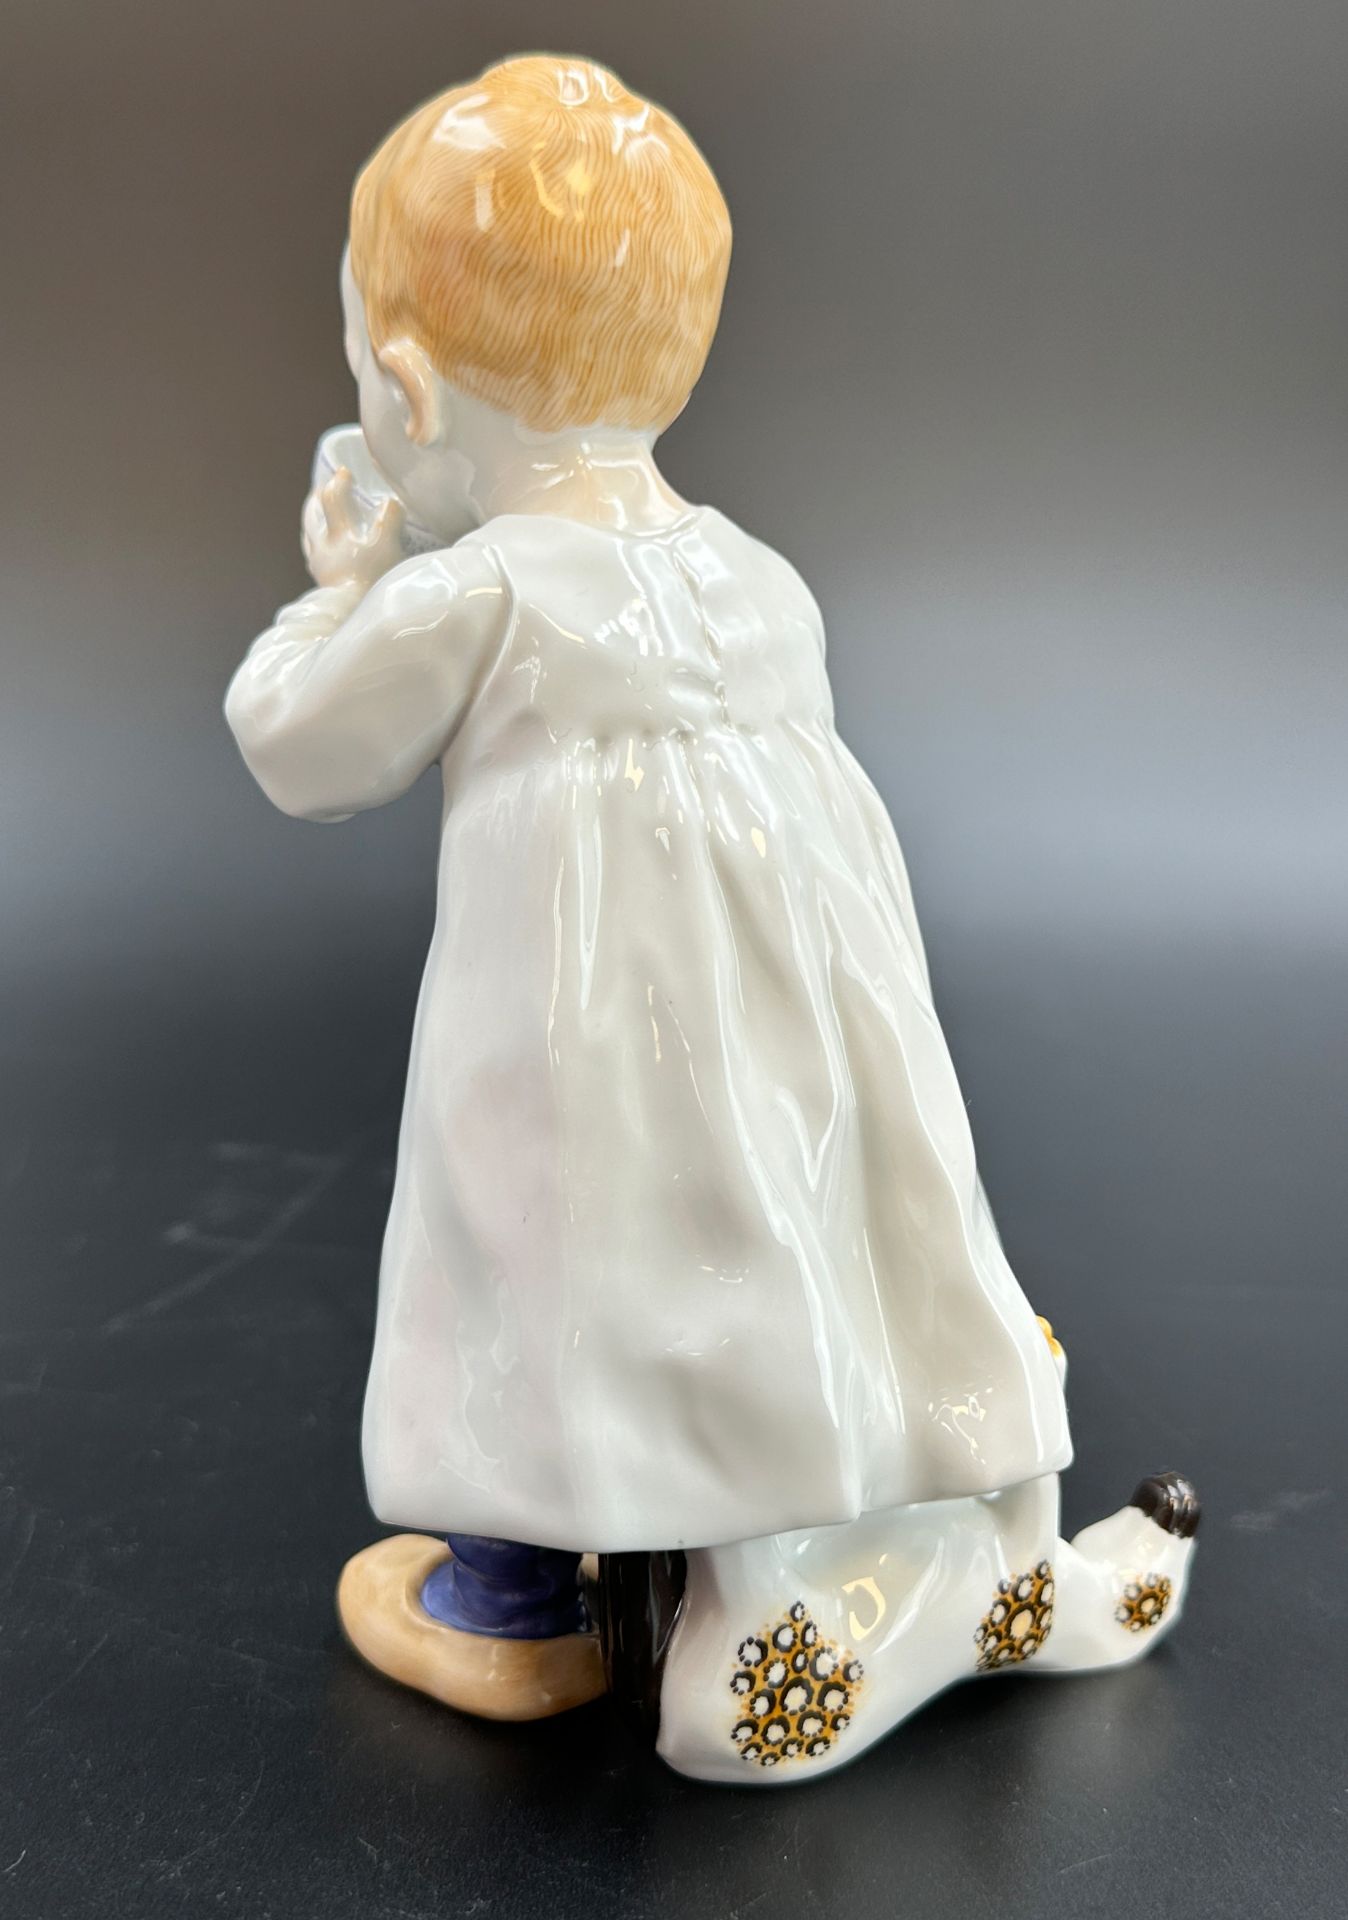 Hentschelkind. MEISSEN. "Child with cup". 1st choice. 1980s. - Image 5 of 11